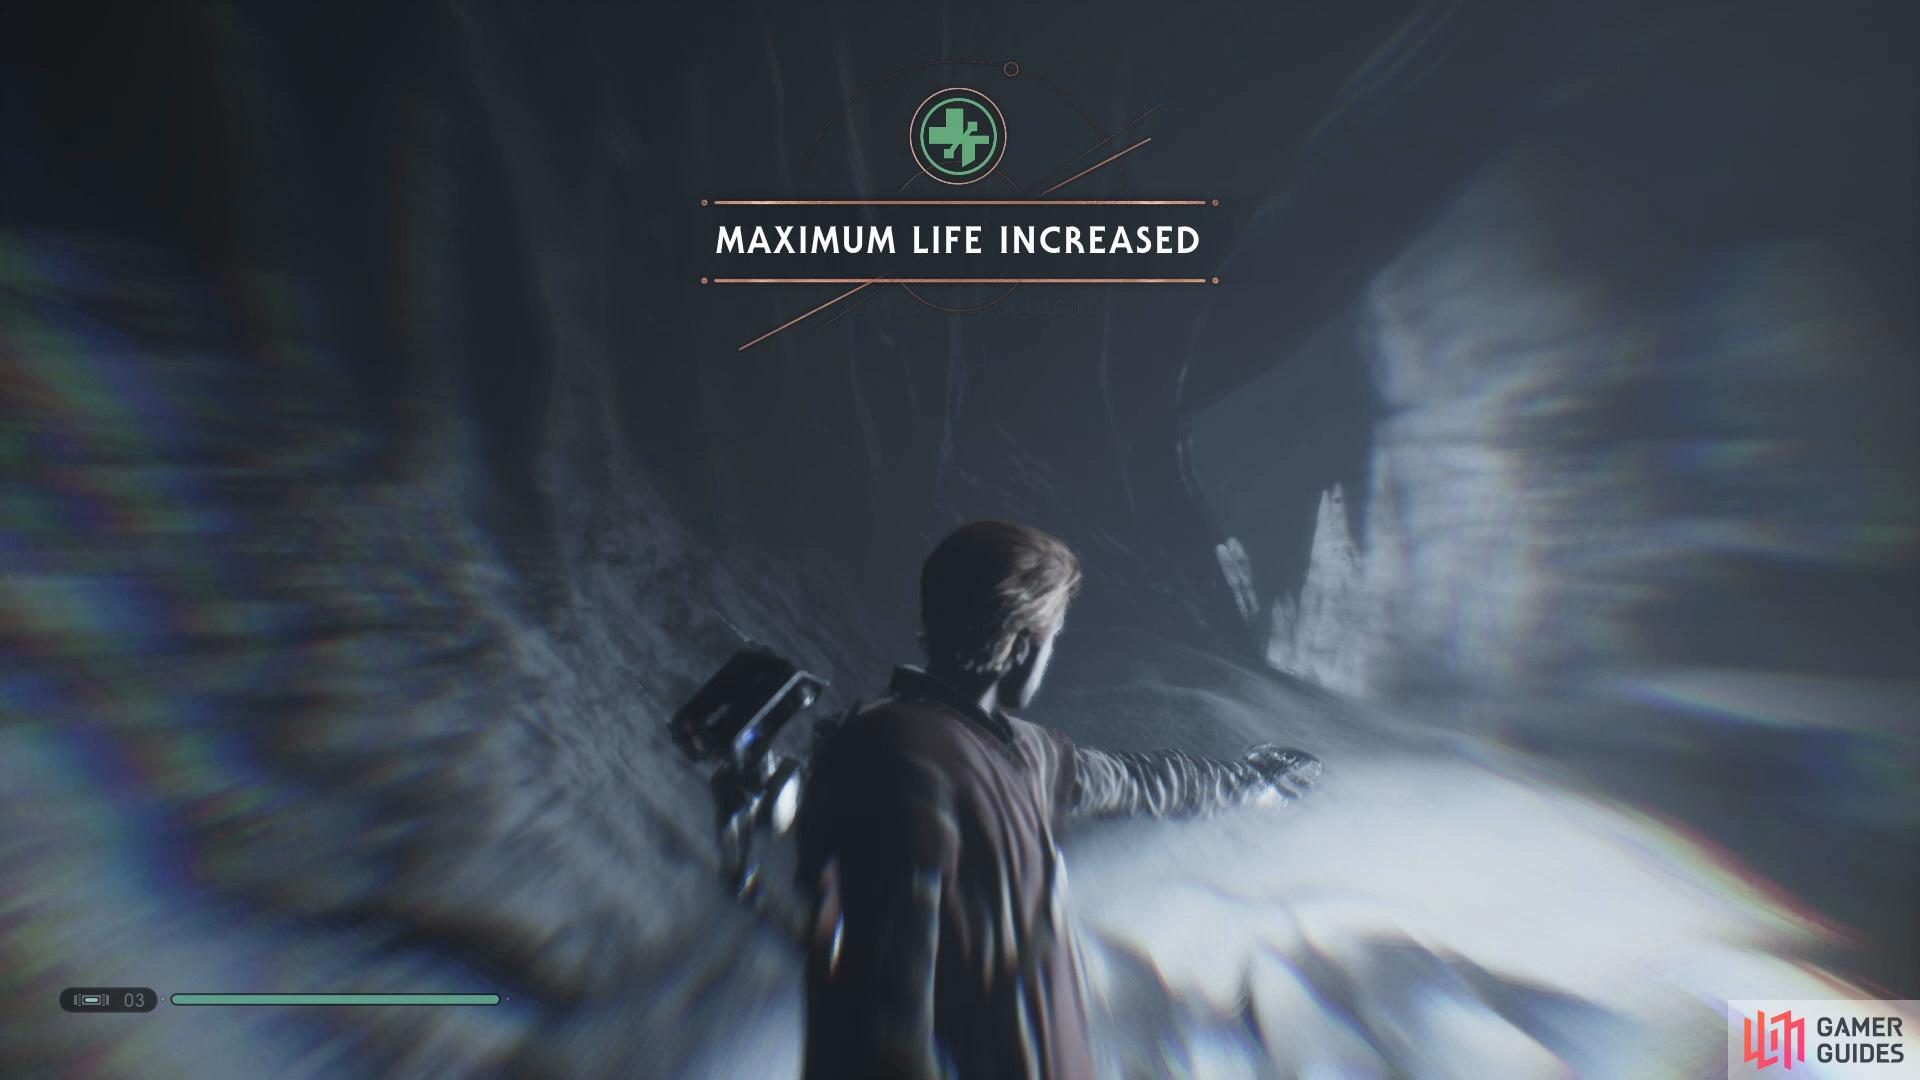 You’ll be able to find the final Life Essence at the end of a Wall Run section..